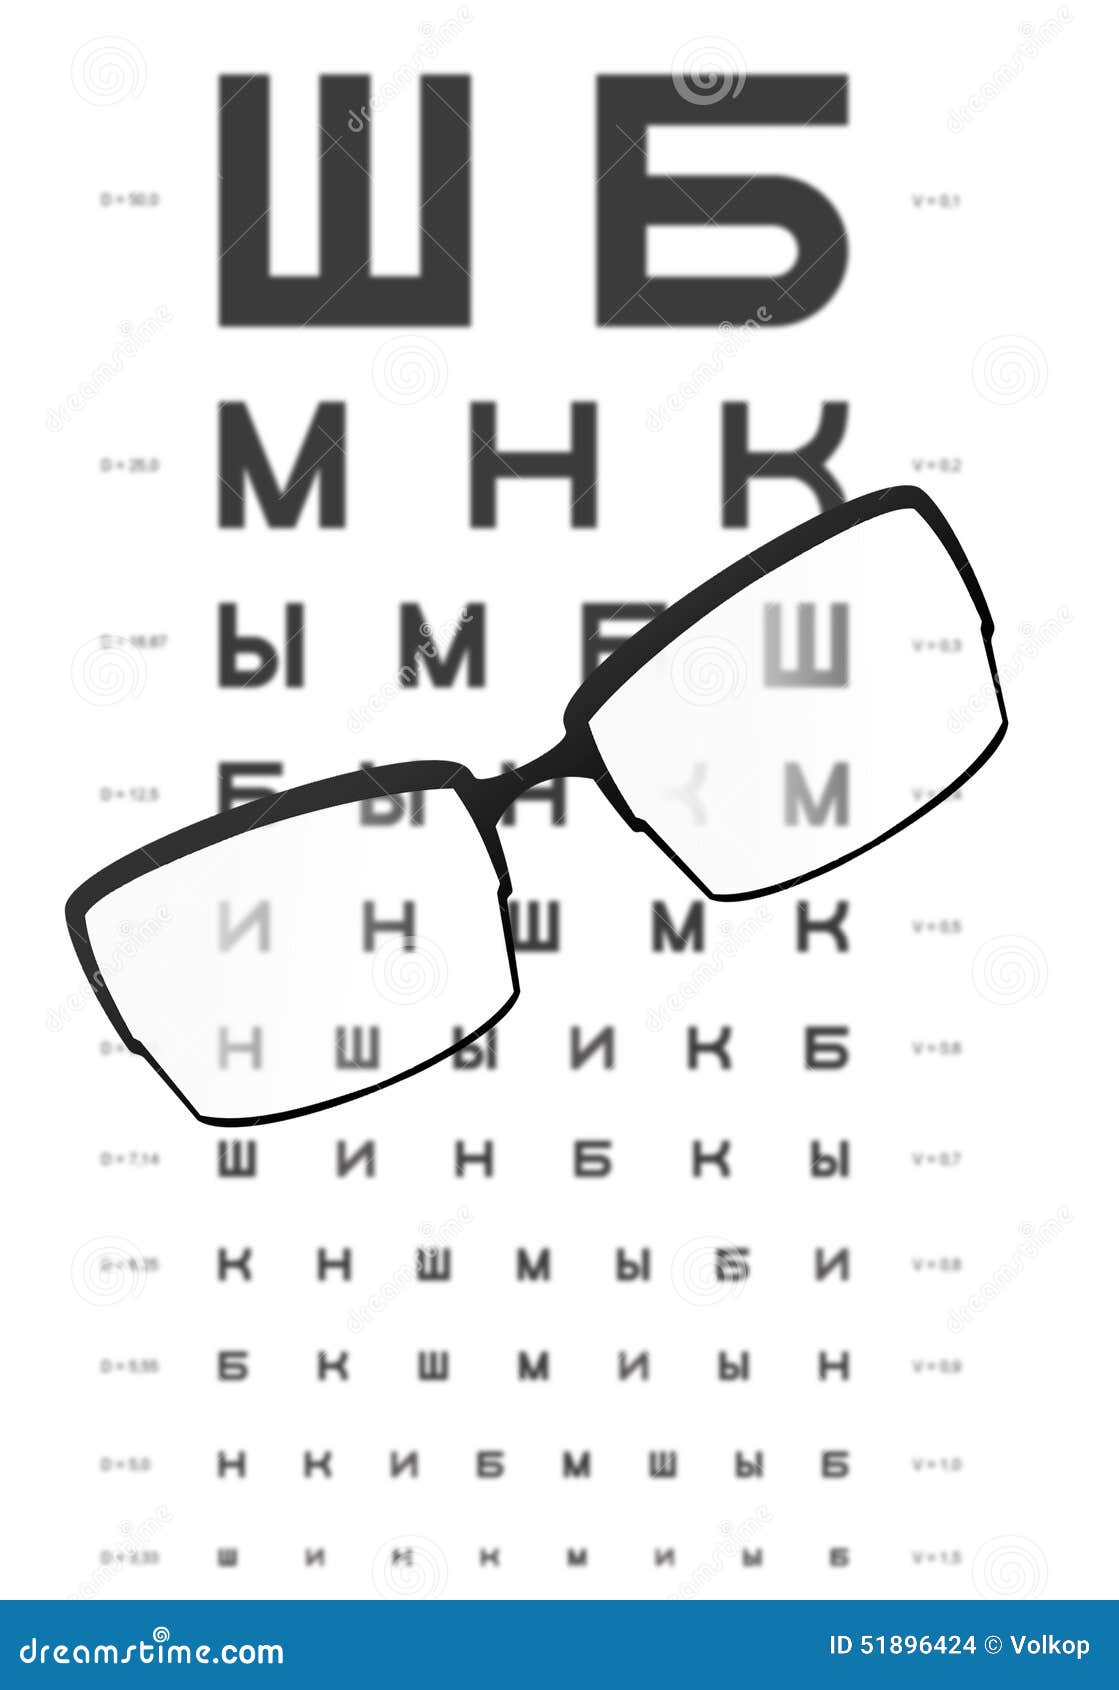 Nearsighted Vision Chart